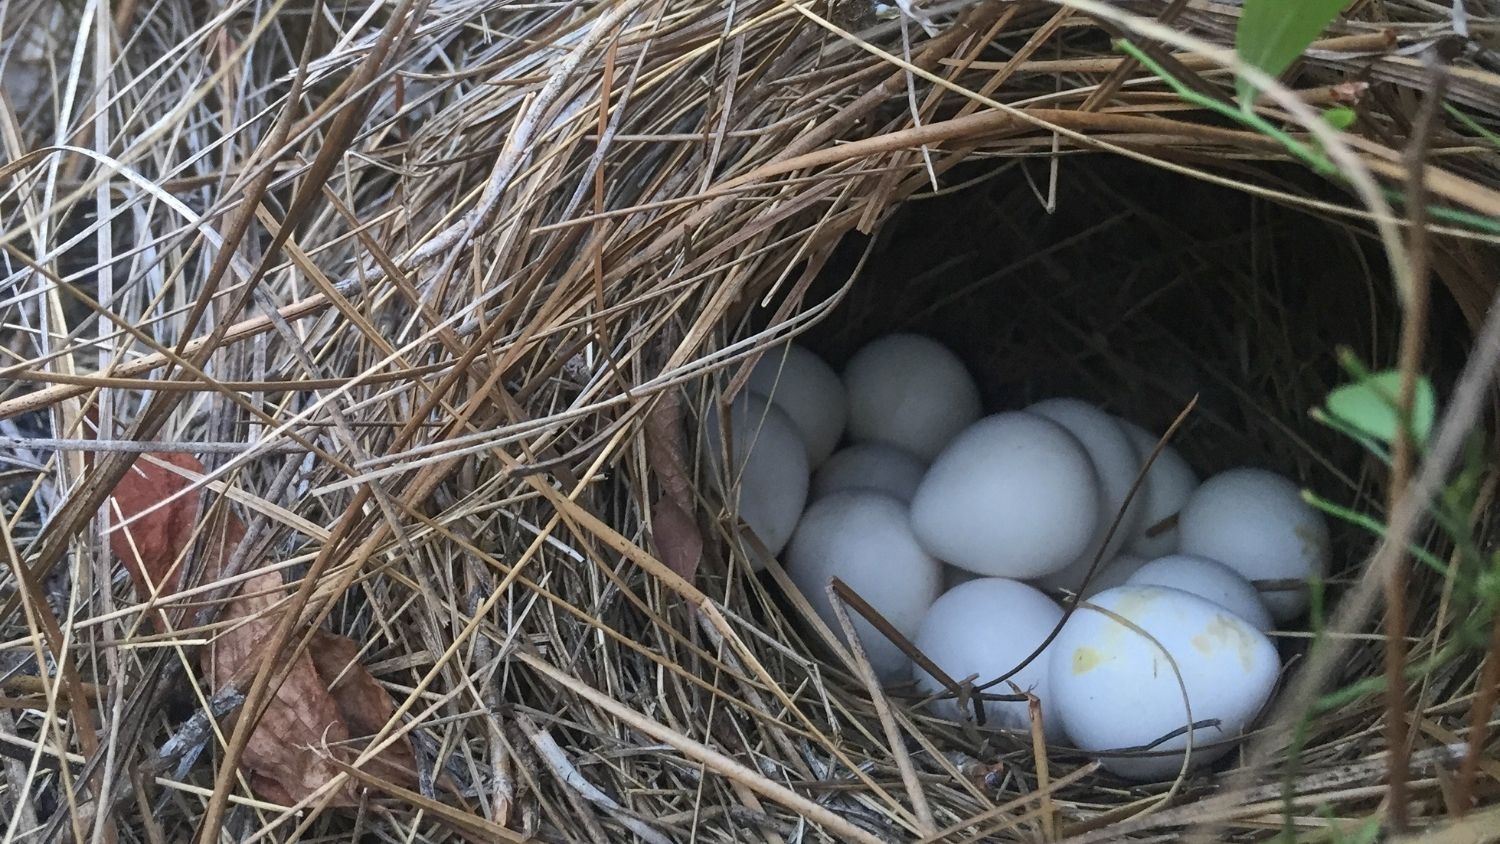 Northern bobwhite nest - Does Prescribed Fire Threaten Quail Nests? - College of Natural Resources News NC State University